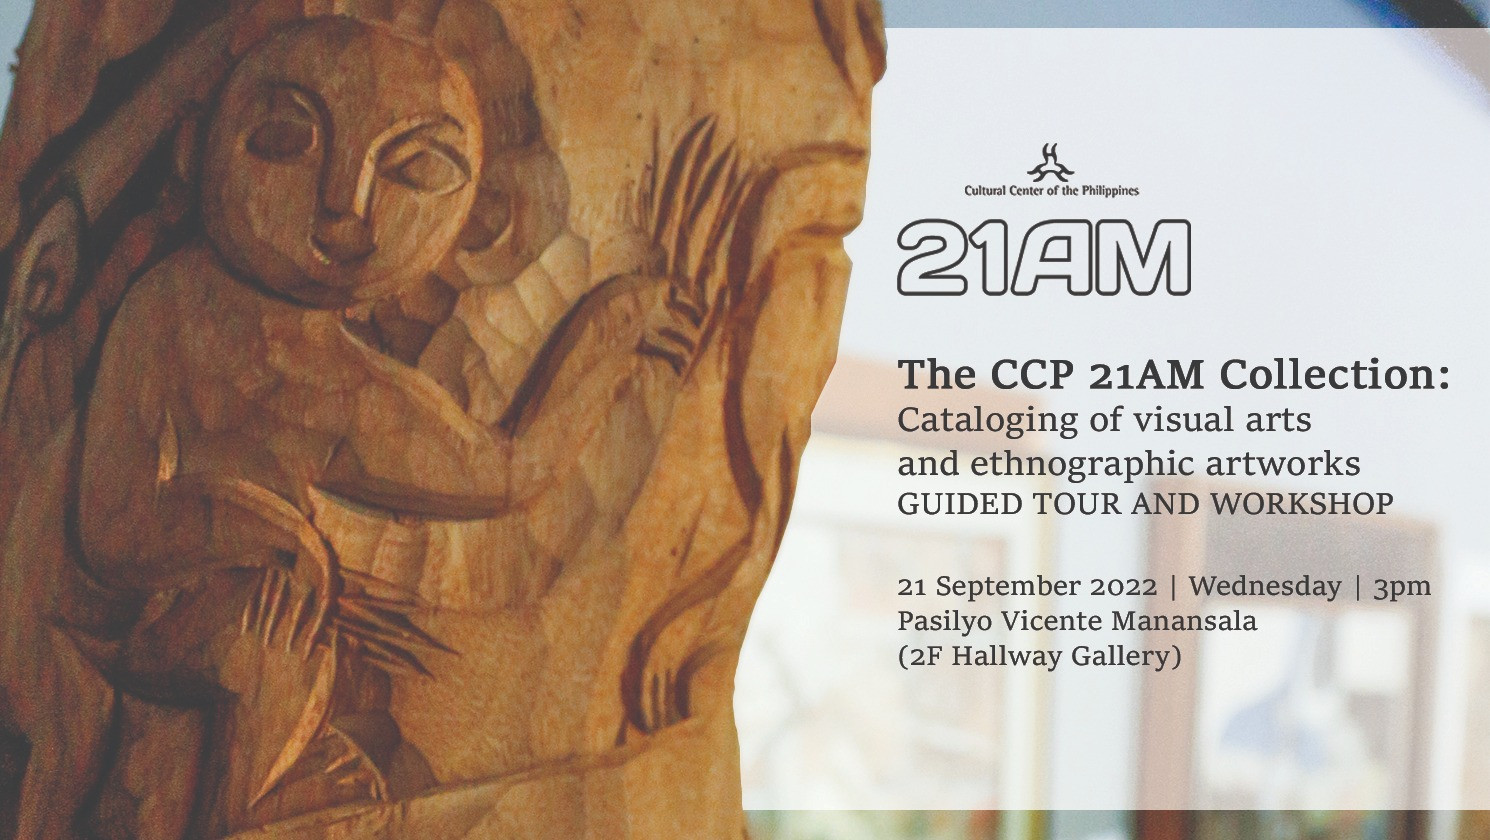 The CCP 21AM Collection: Cataloging of visual arts and ethnographic artworks